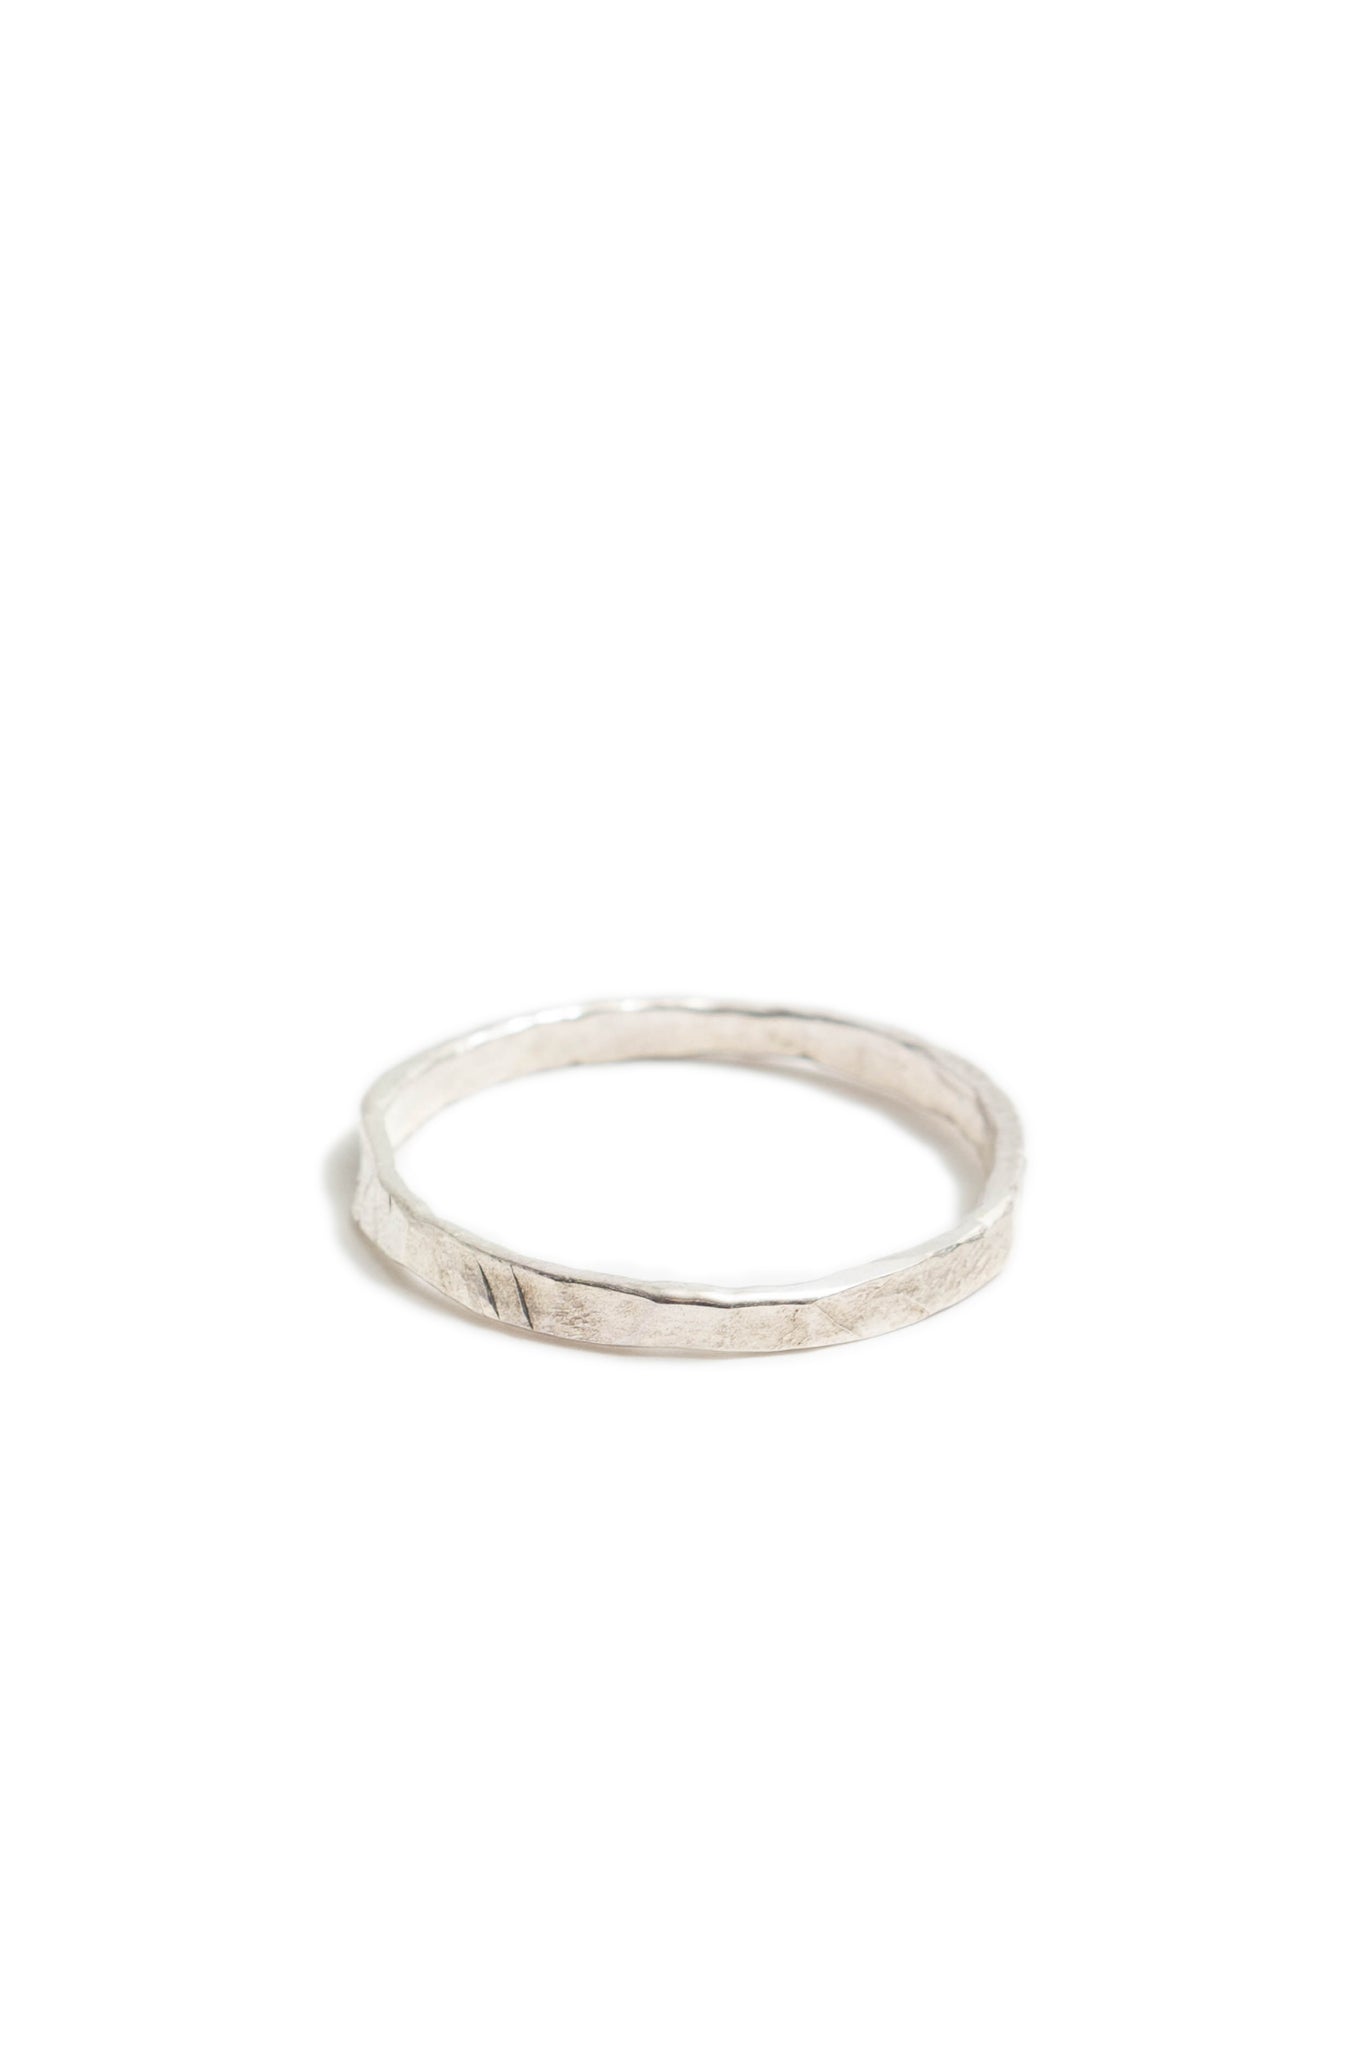 Thin Sterling Silver Hammered Stacking Ring